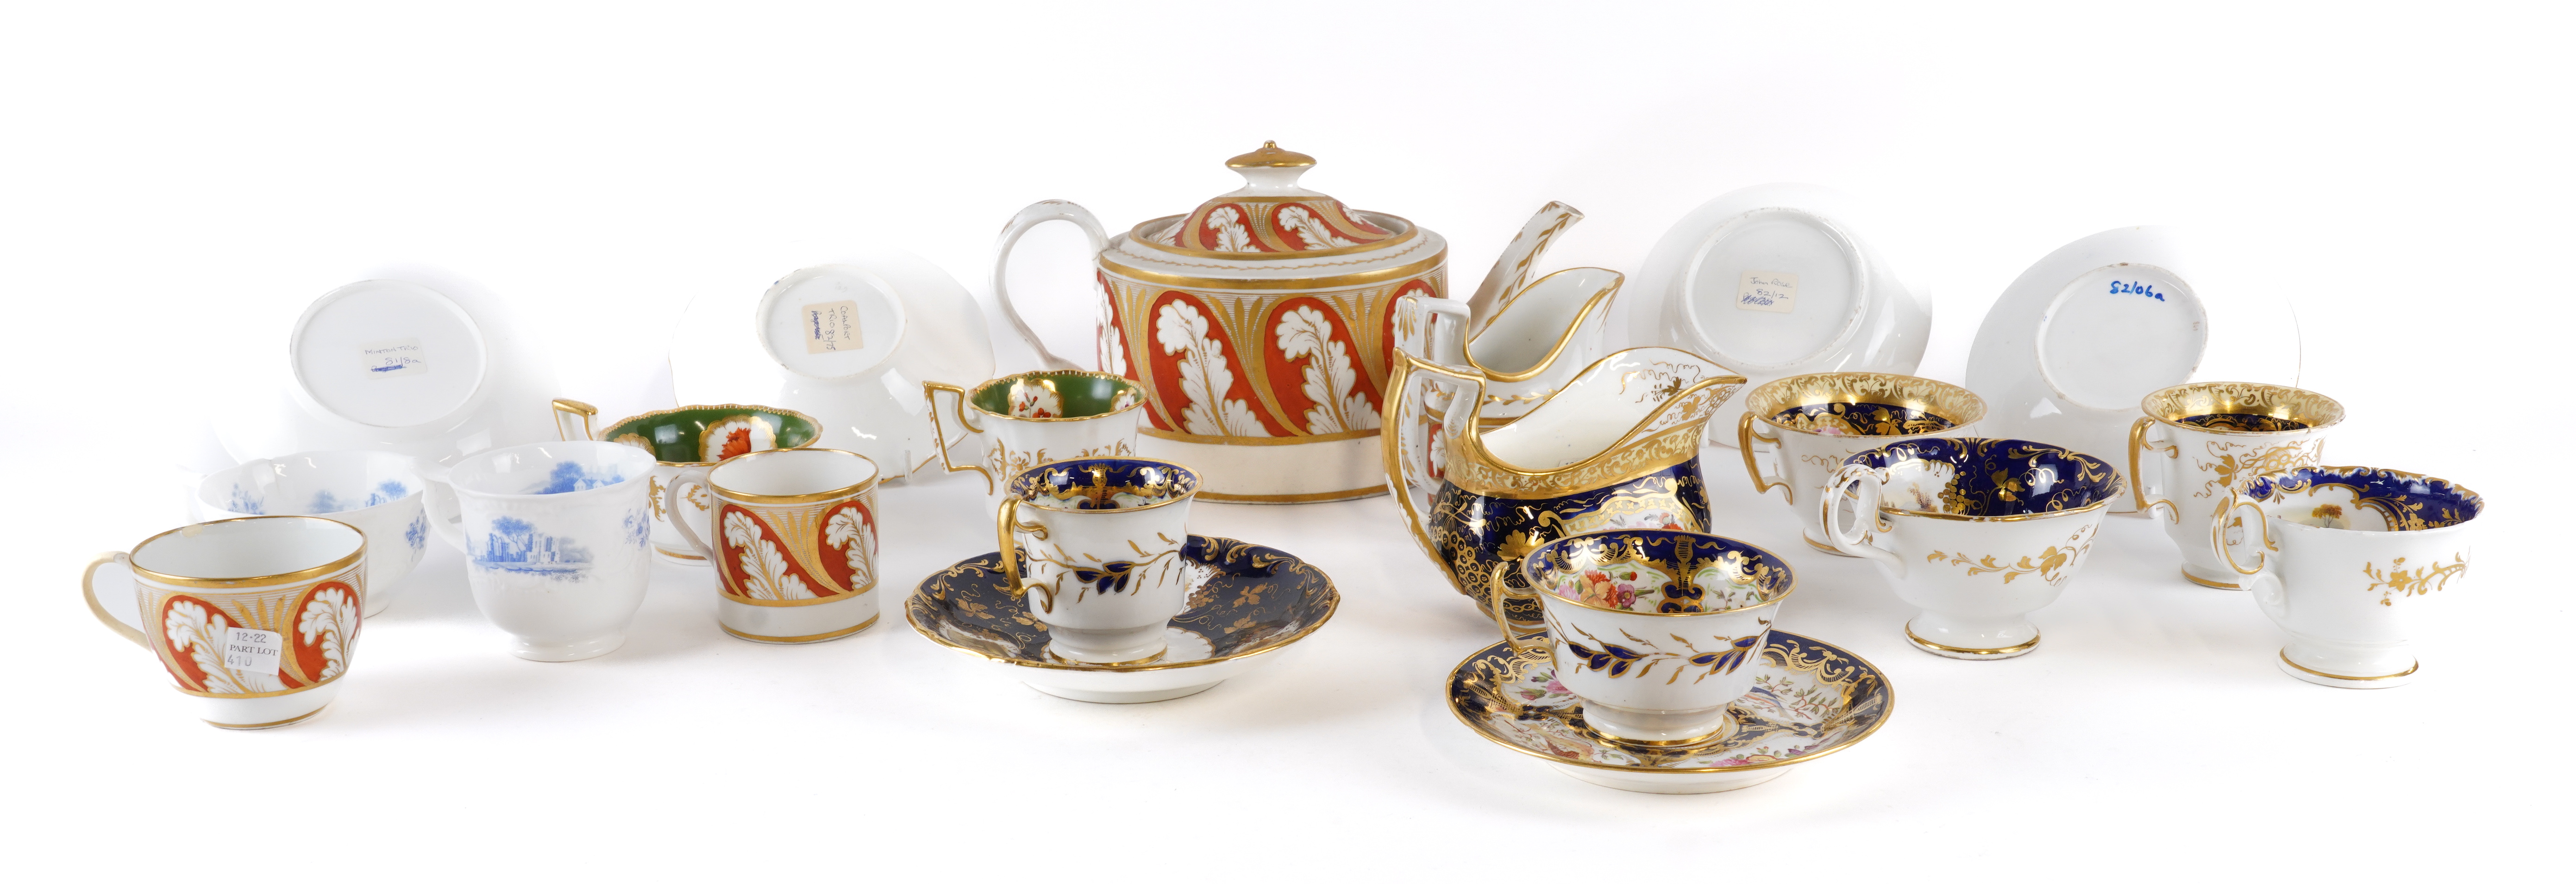 A GROUP OF ENGLISH PORCELAIN TEA AND COFFEE WARES - Image 2 of 3